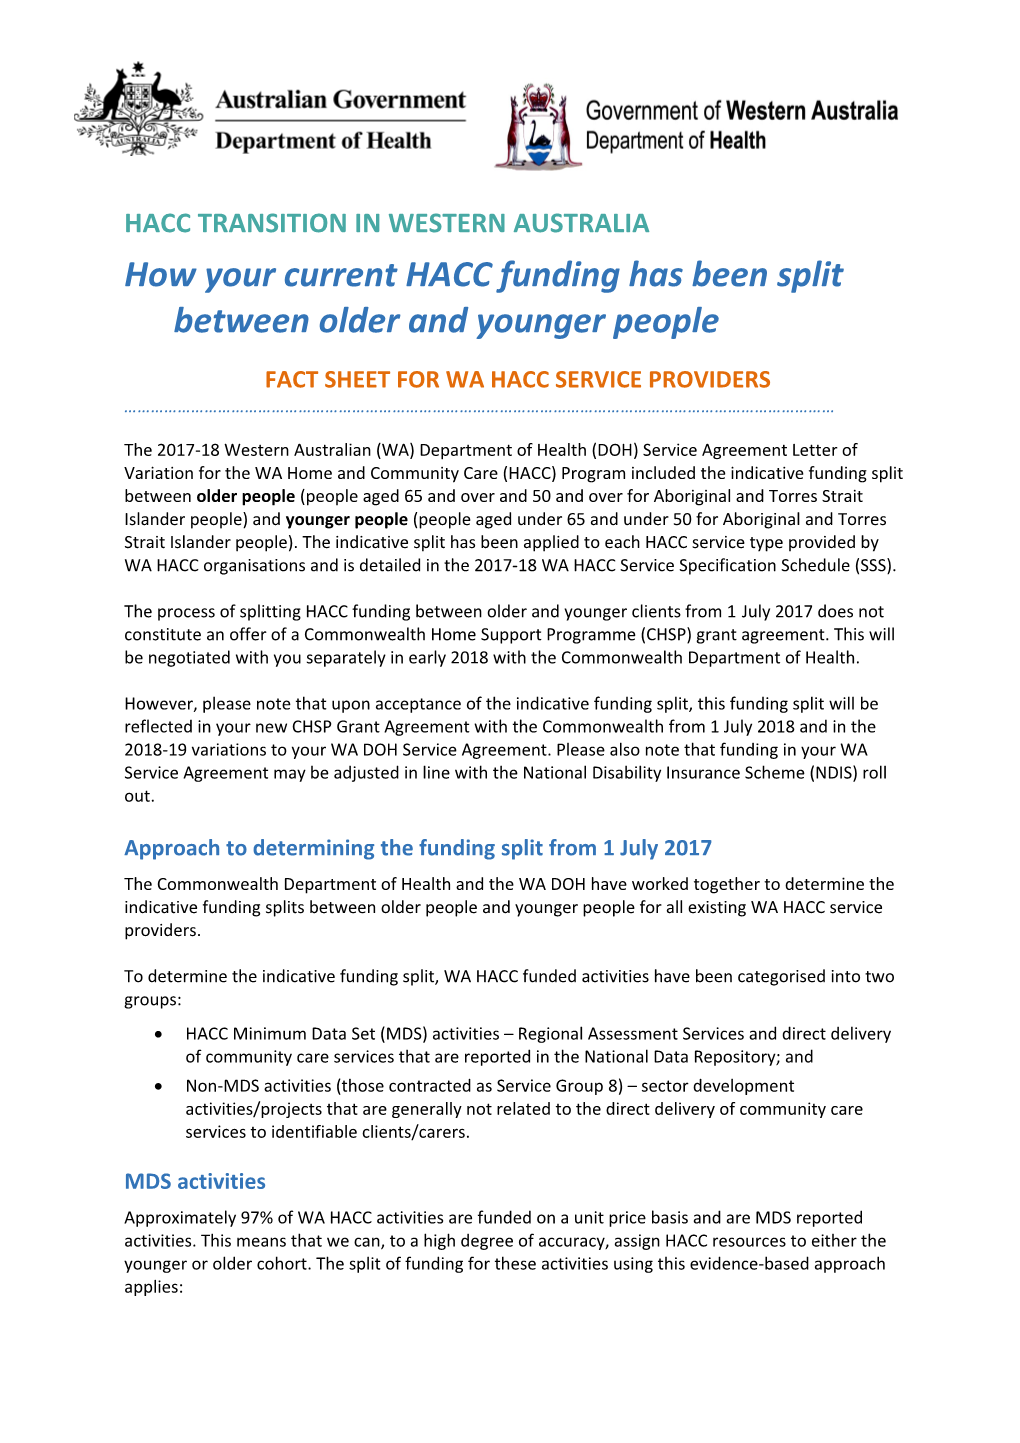 How Your Current HACC Funding Has Been Split Between Older and Younger People